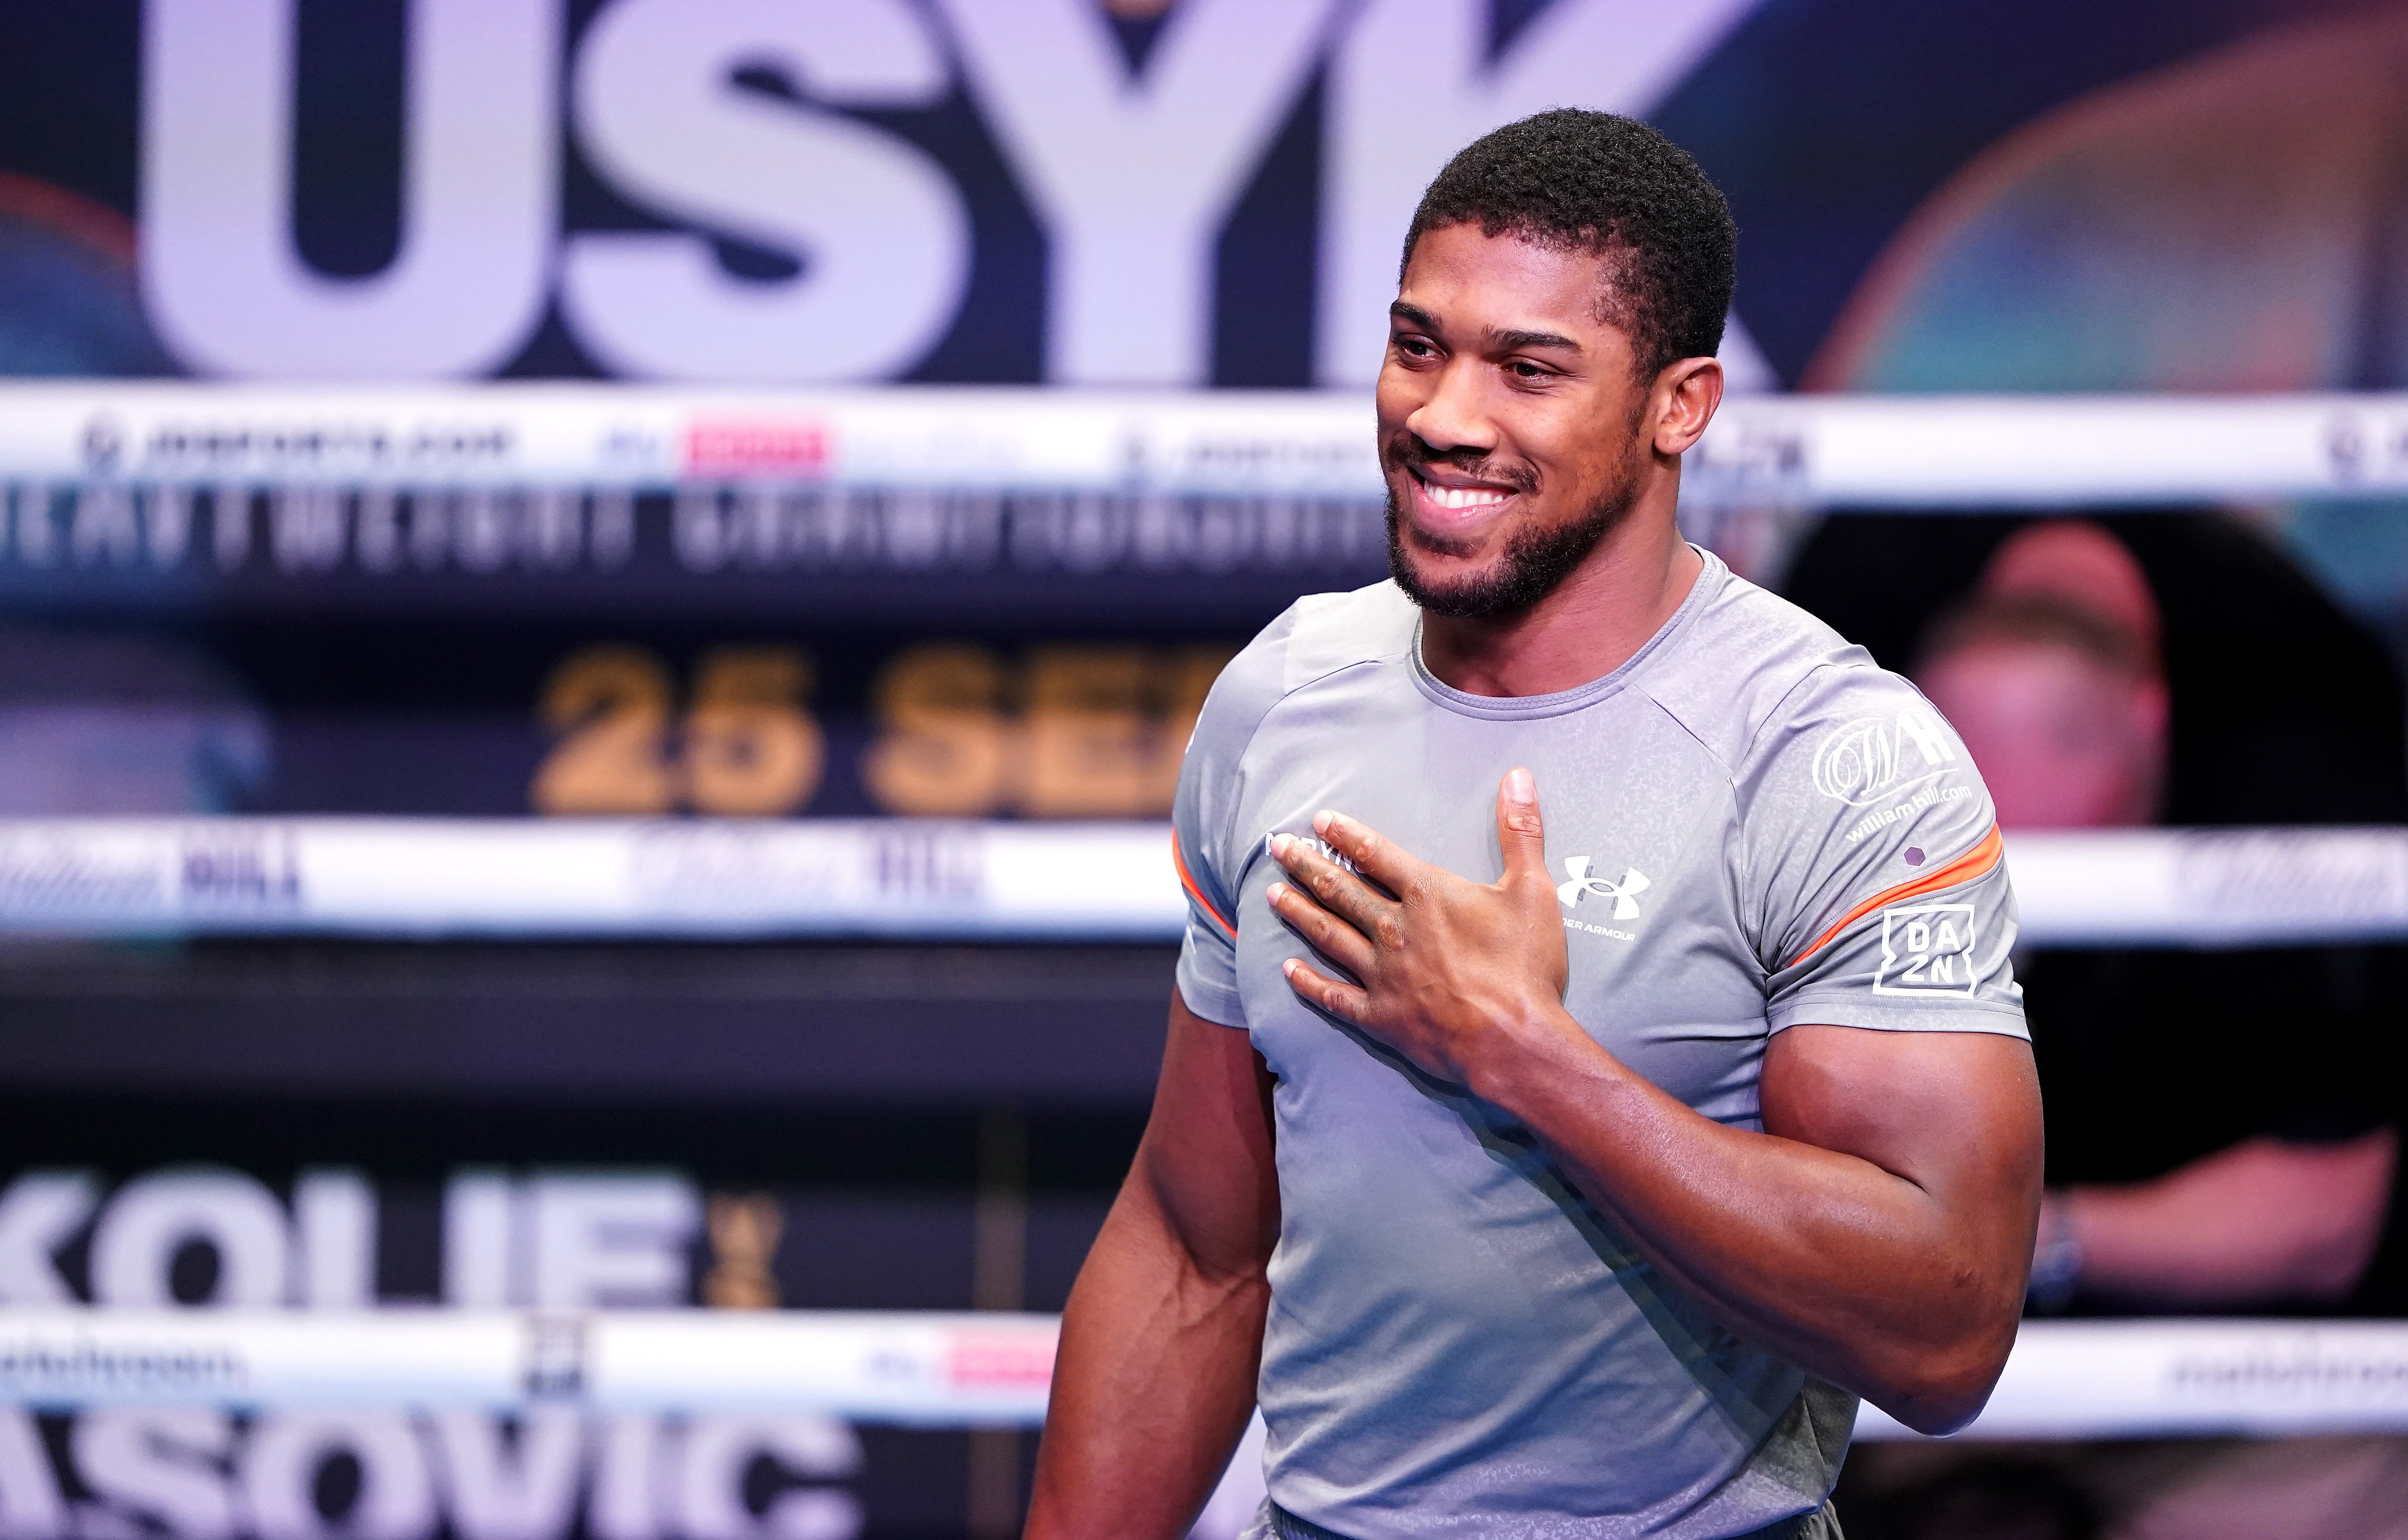 Anthony Joshua, pictured, is in for a tough night, according to his promoter Eddie Hearn (Zac Goodwin/PA)